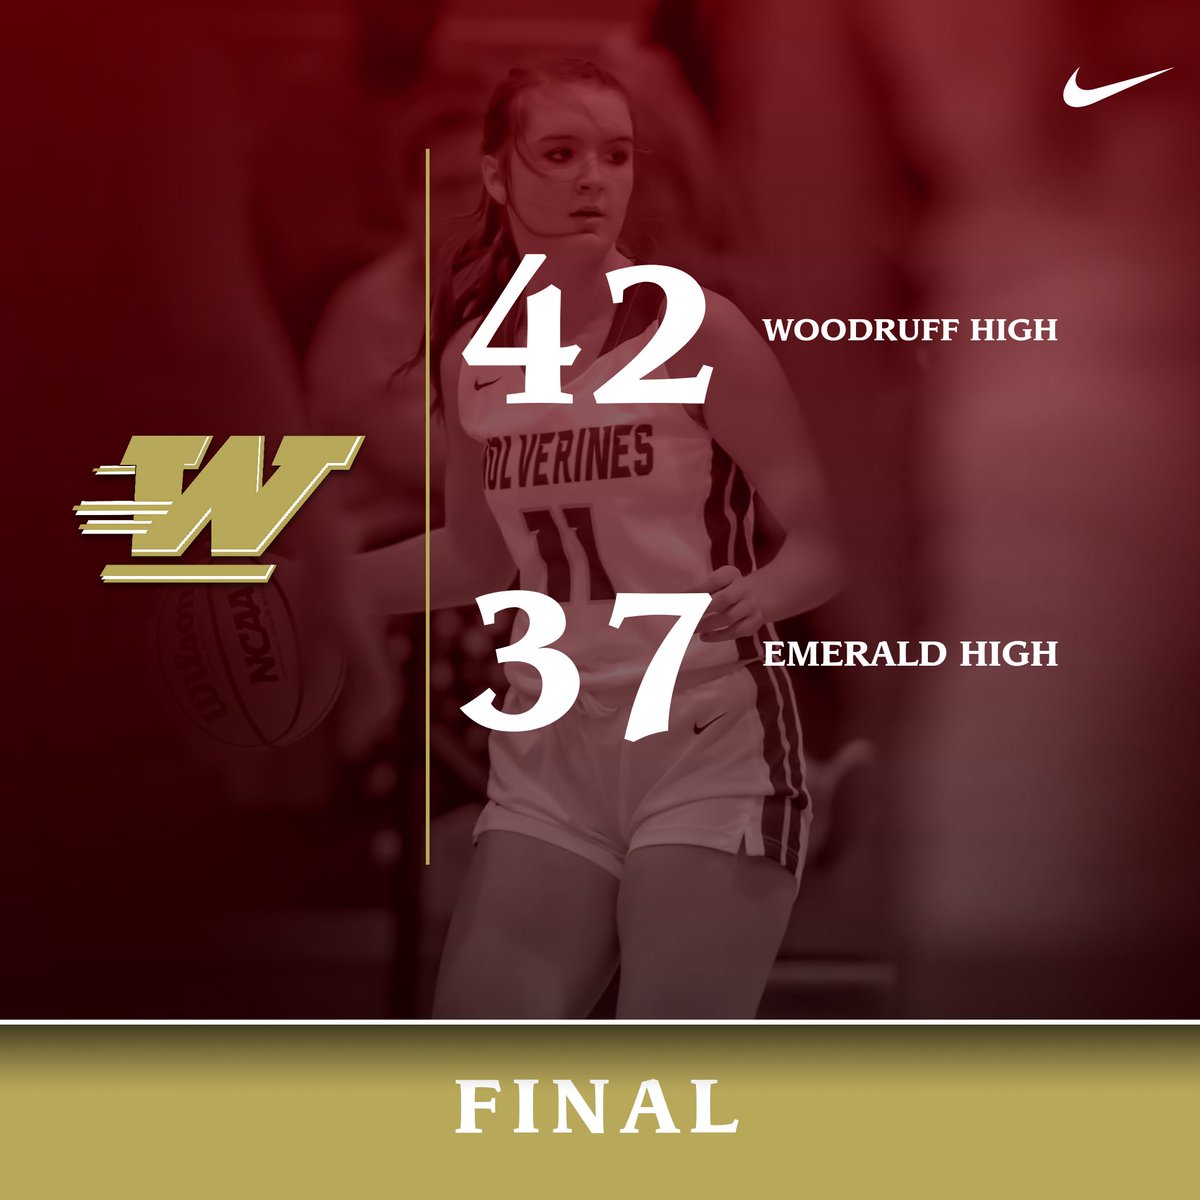 Lady Wolverines improve to 5-1 in region play!